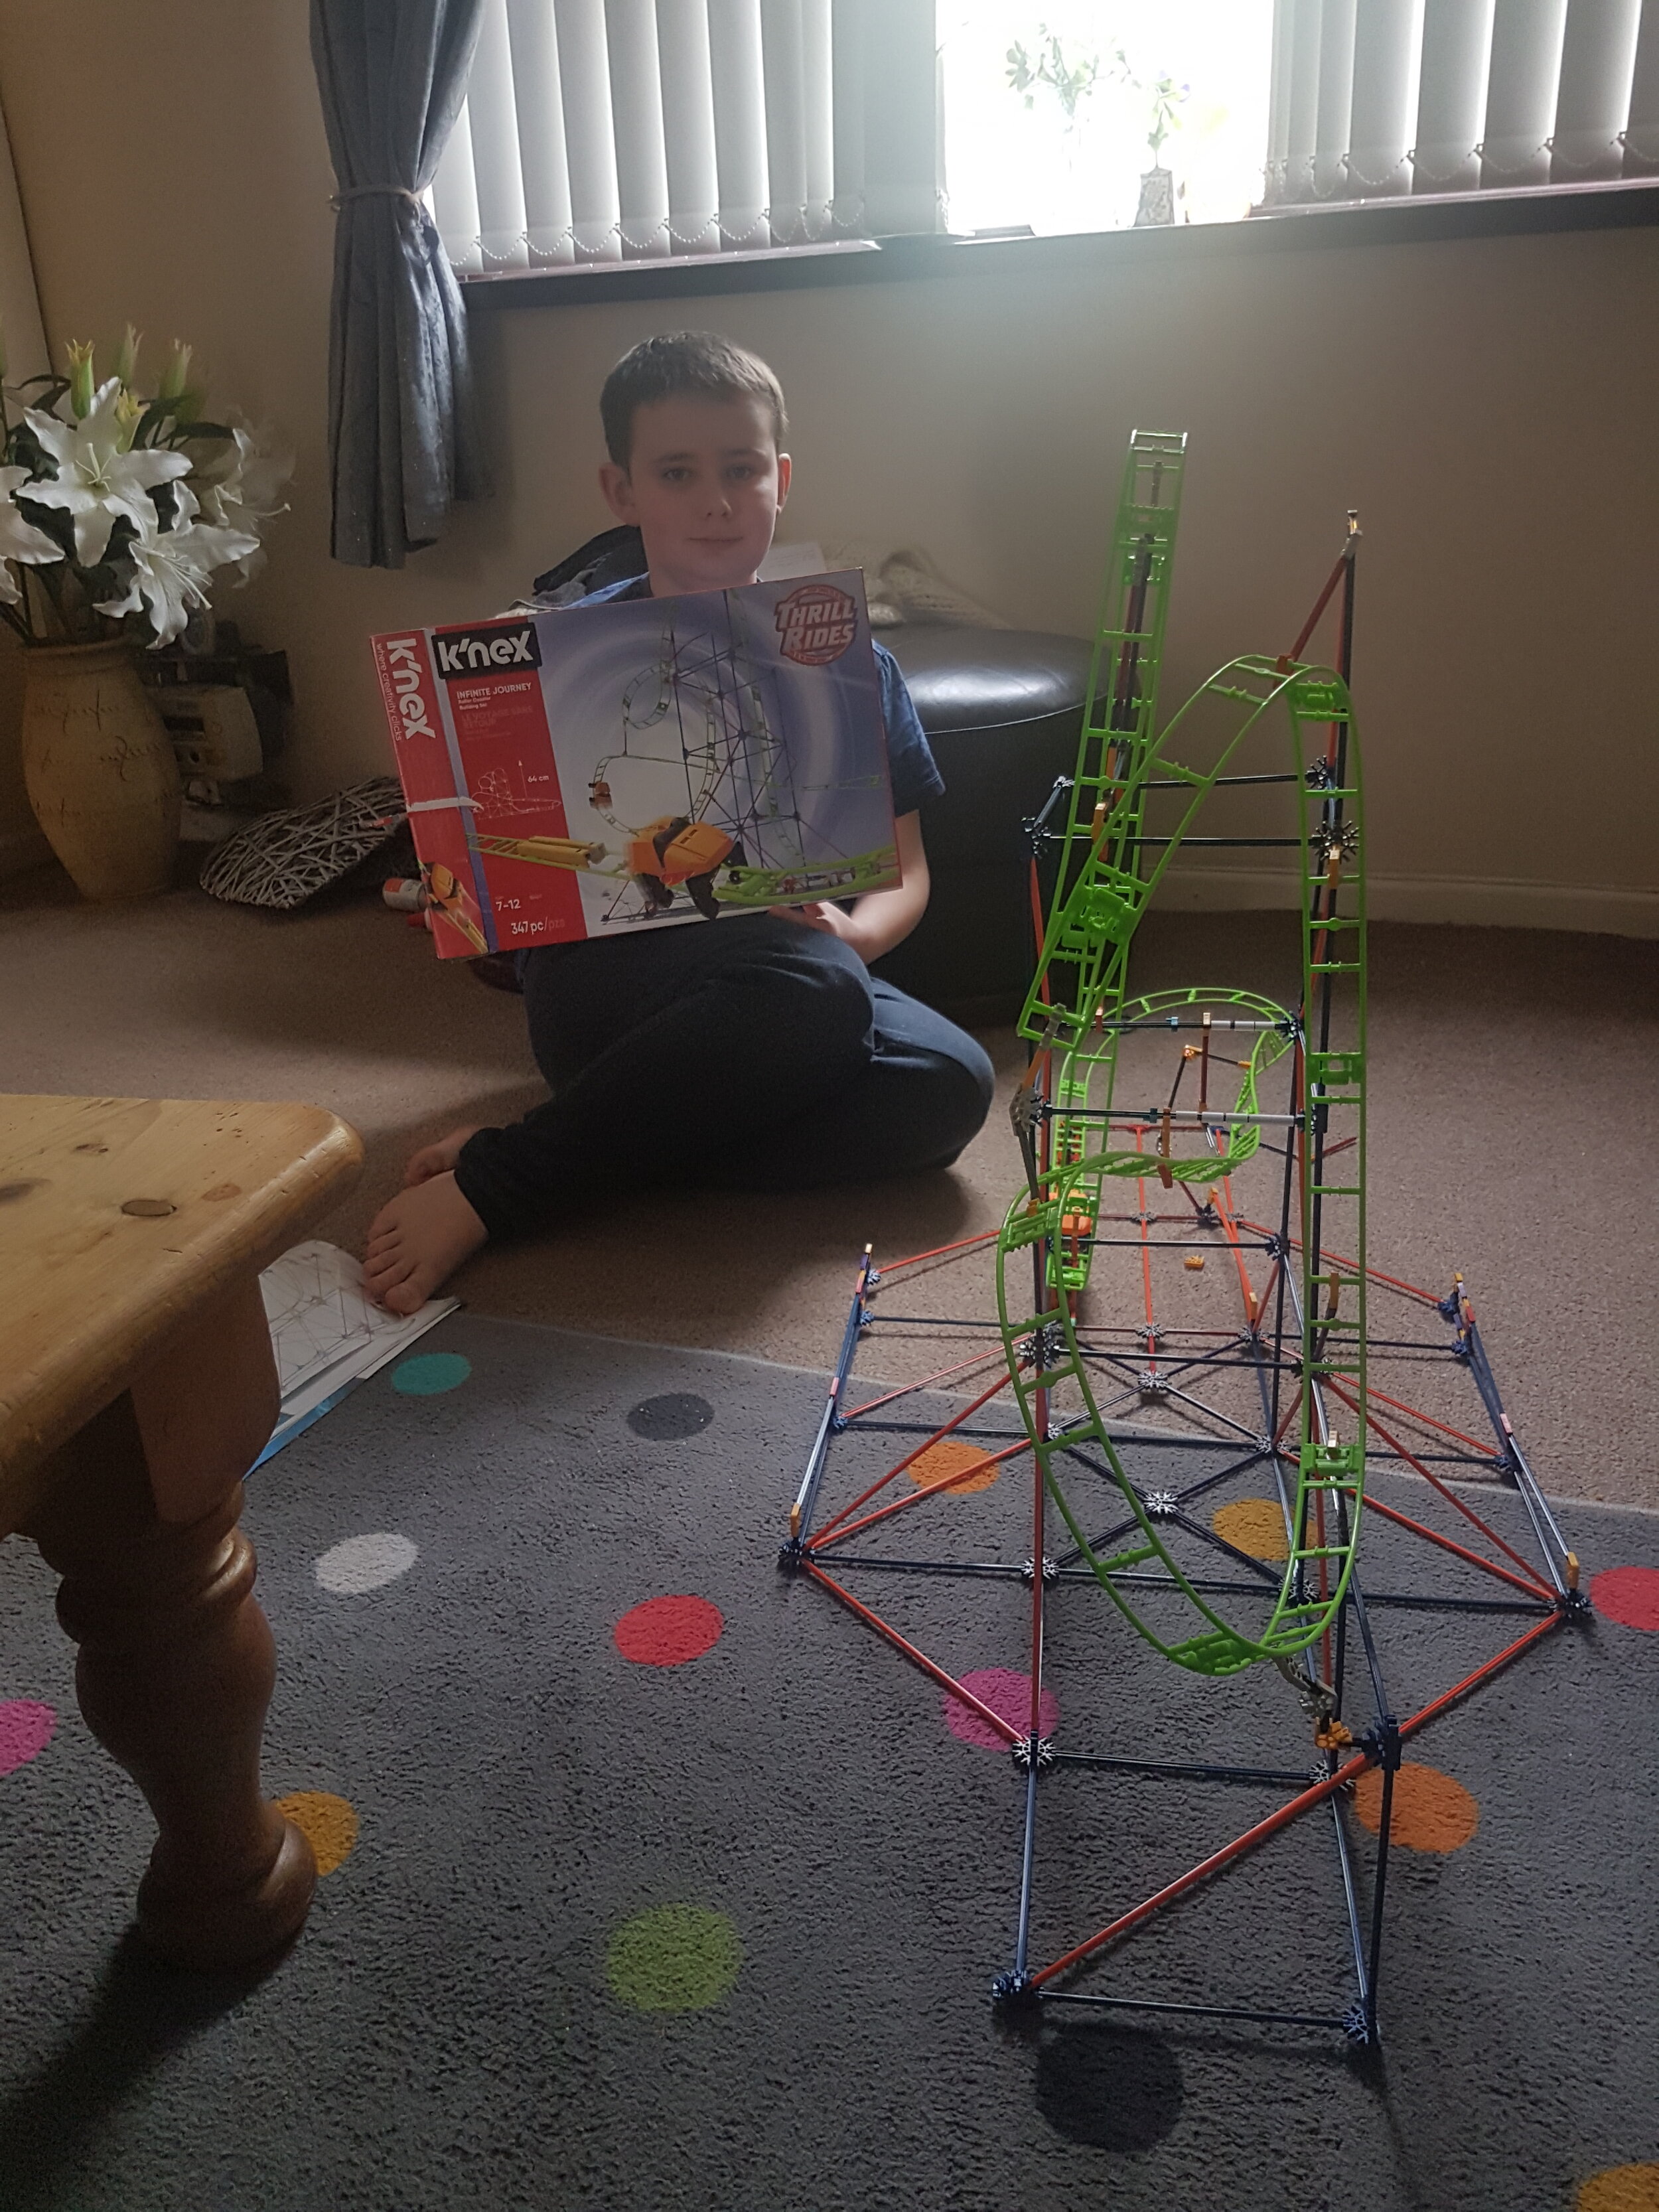 What an impressive design by Thomas P7